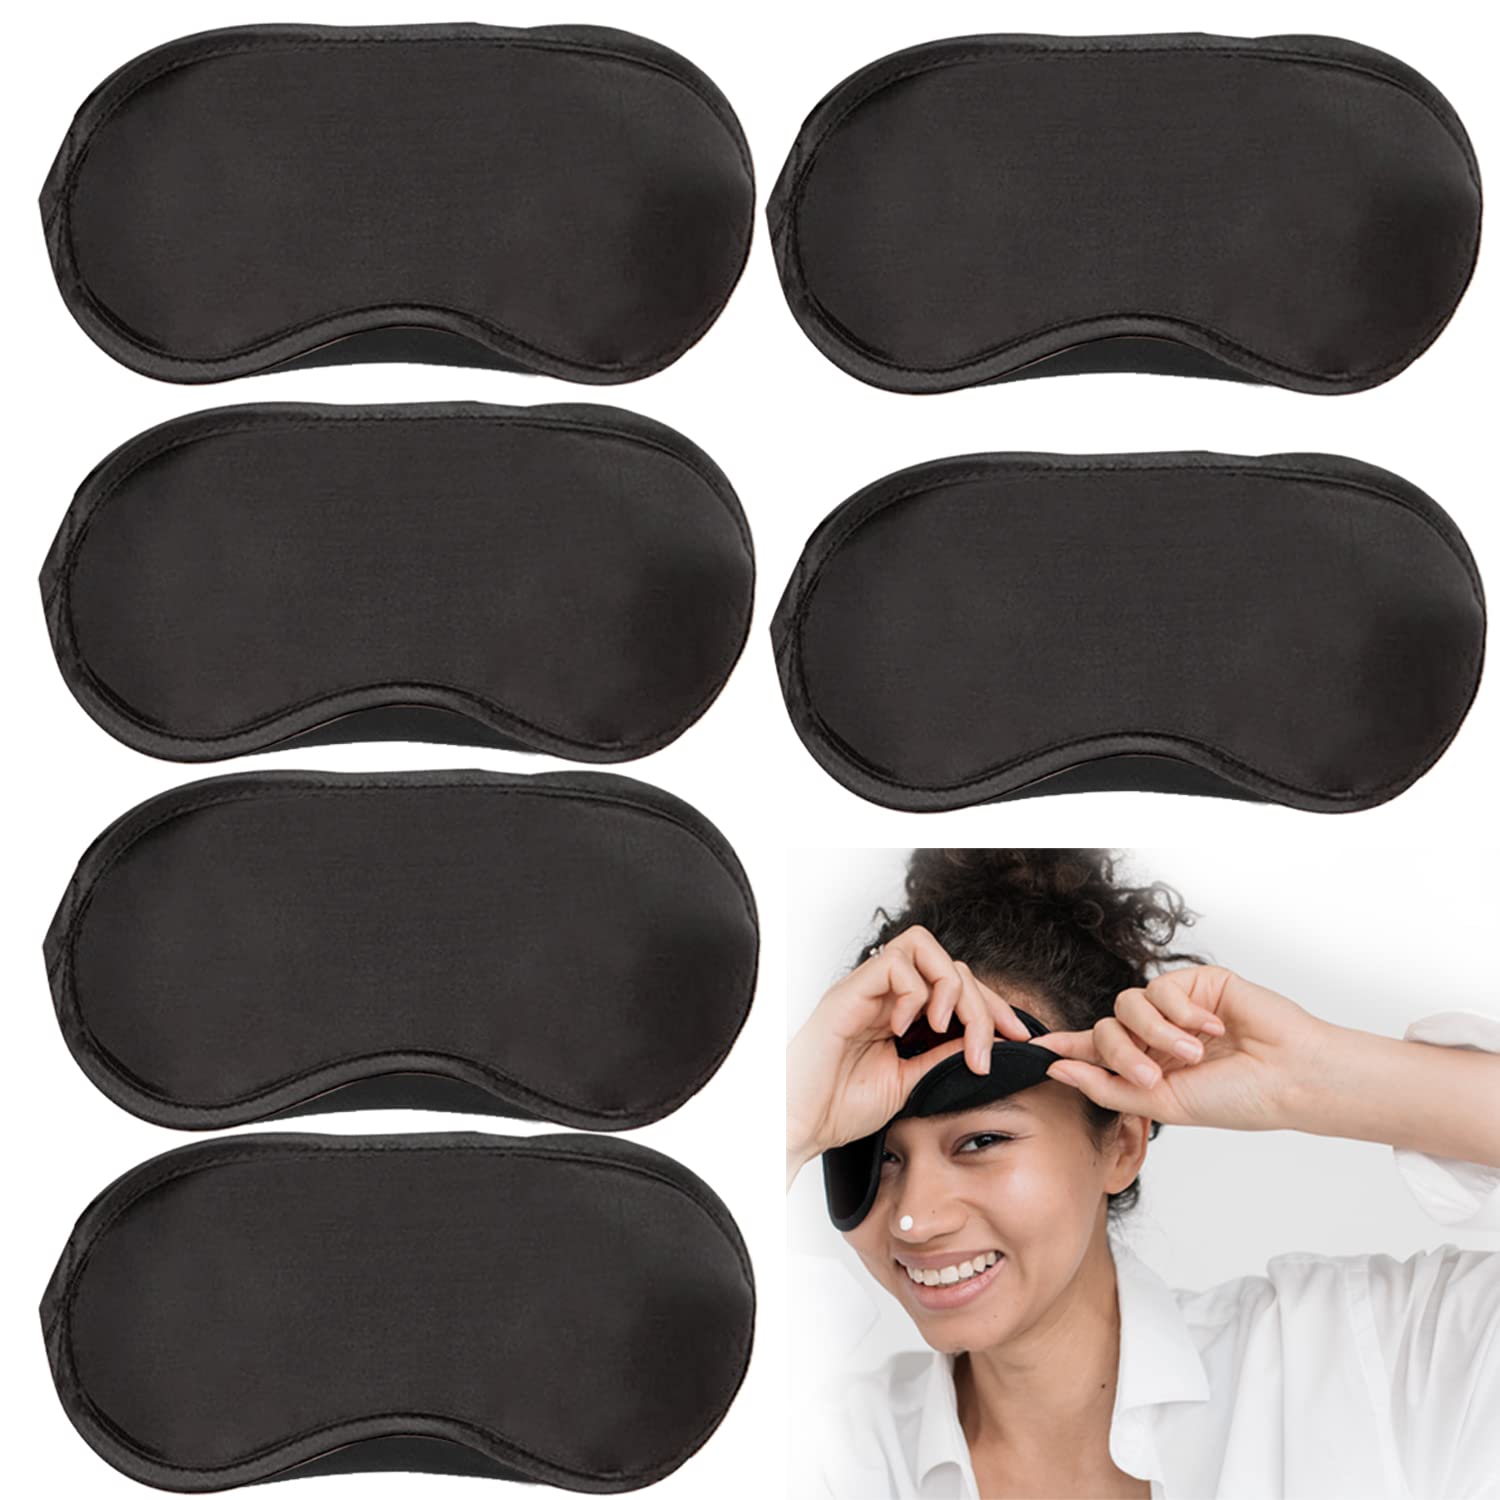 30 Pieces Blindfold Eye Cover Sleep Mask for Games Party Sleeping Travel  with Nose Pad and Adjustable Strap (Black)